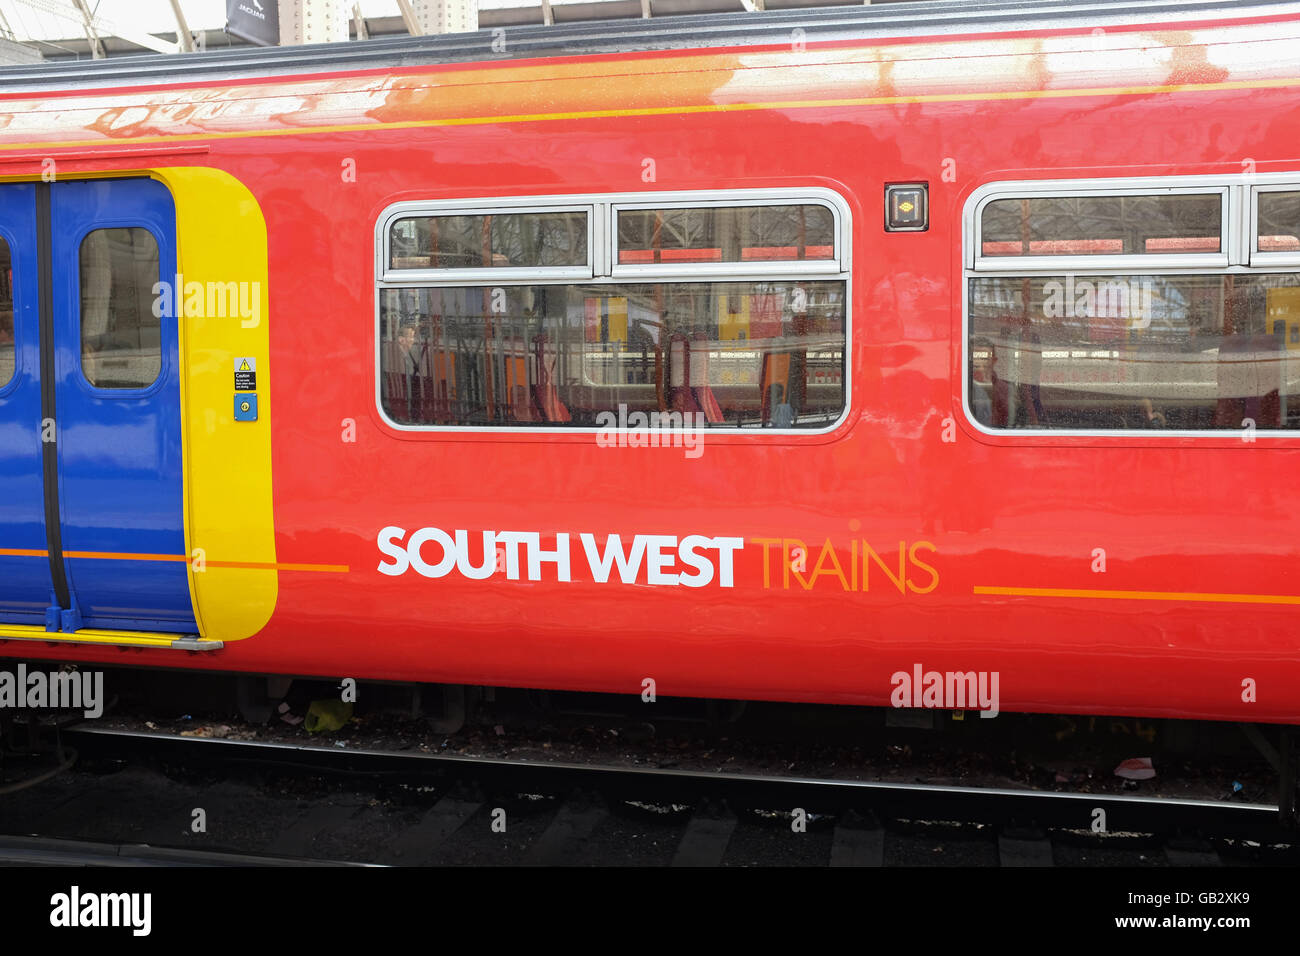 A South West train in England. Stock Photo